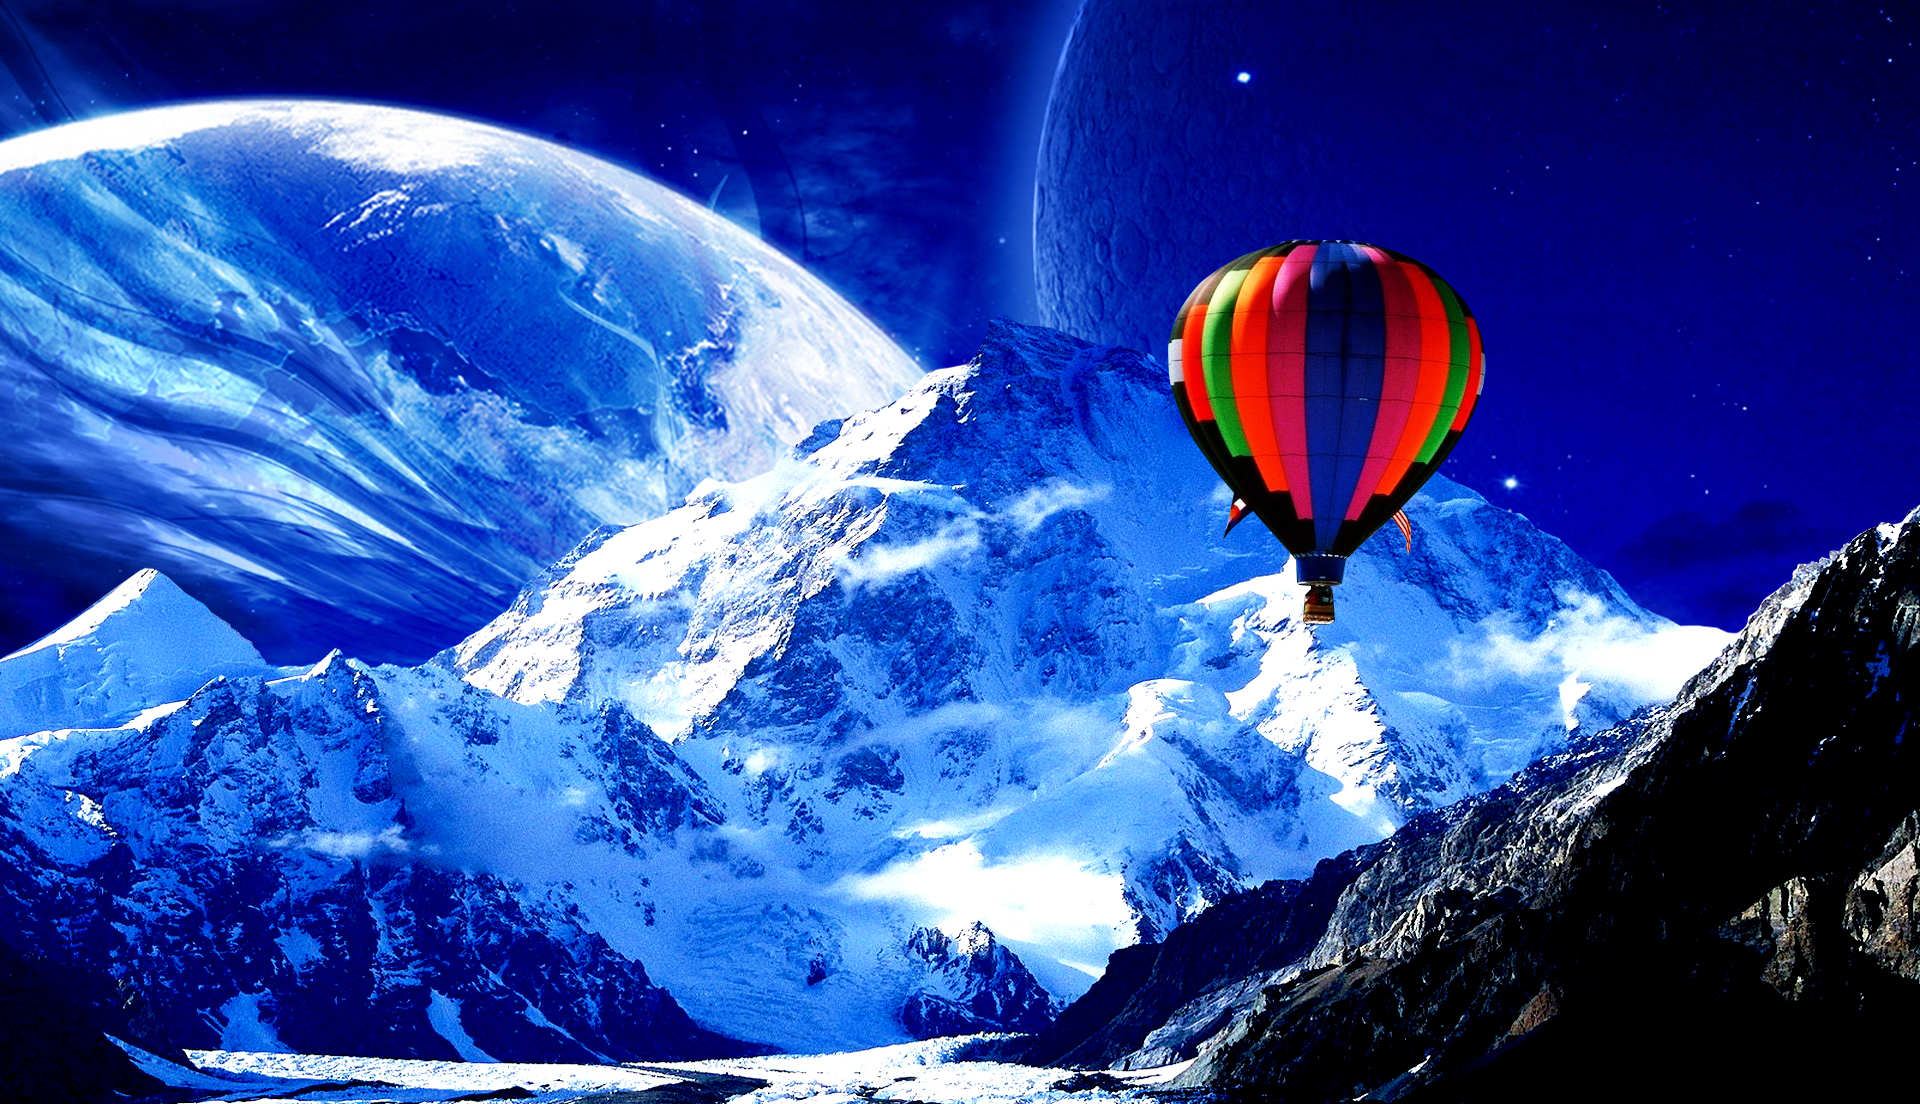 3d, photography, manipulation, balloon, cgi, hot air balloon, landscape, moon, mountain, psychedelic, scenic, snow, trippy, winter cellphone